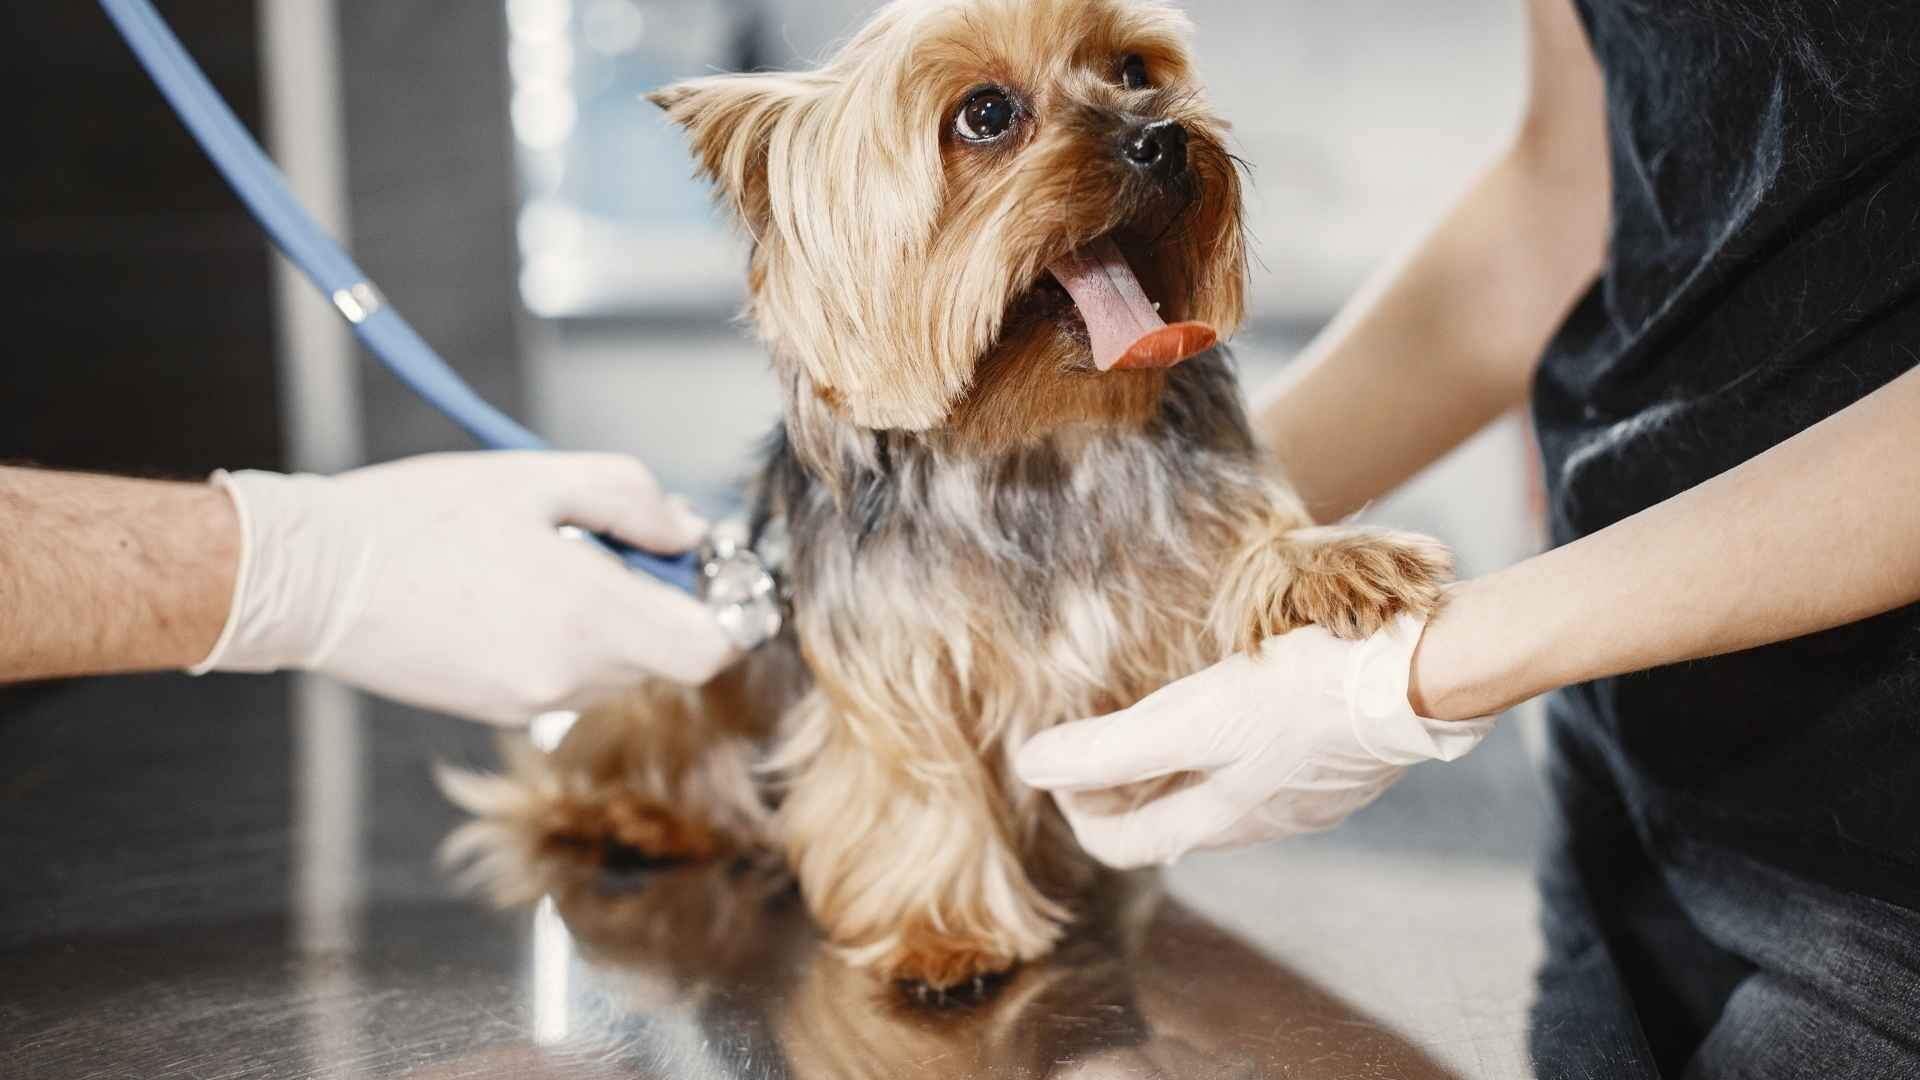 How to Give Medication to a Dog That Bites in 4 Easy Ways?